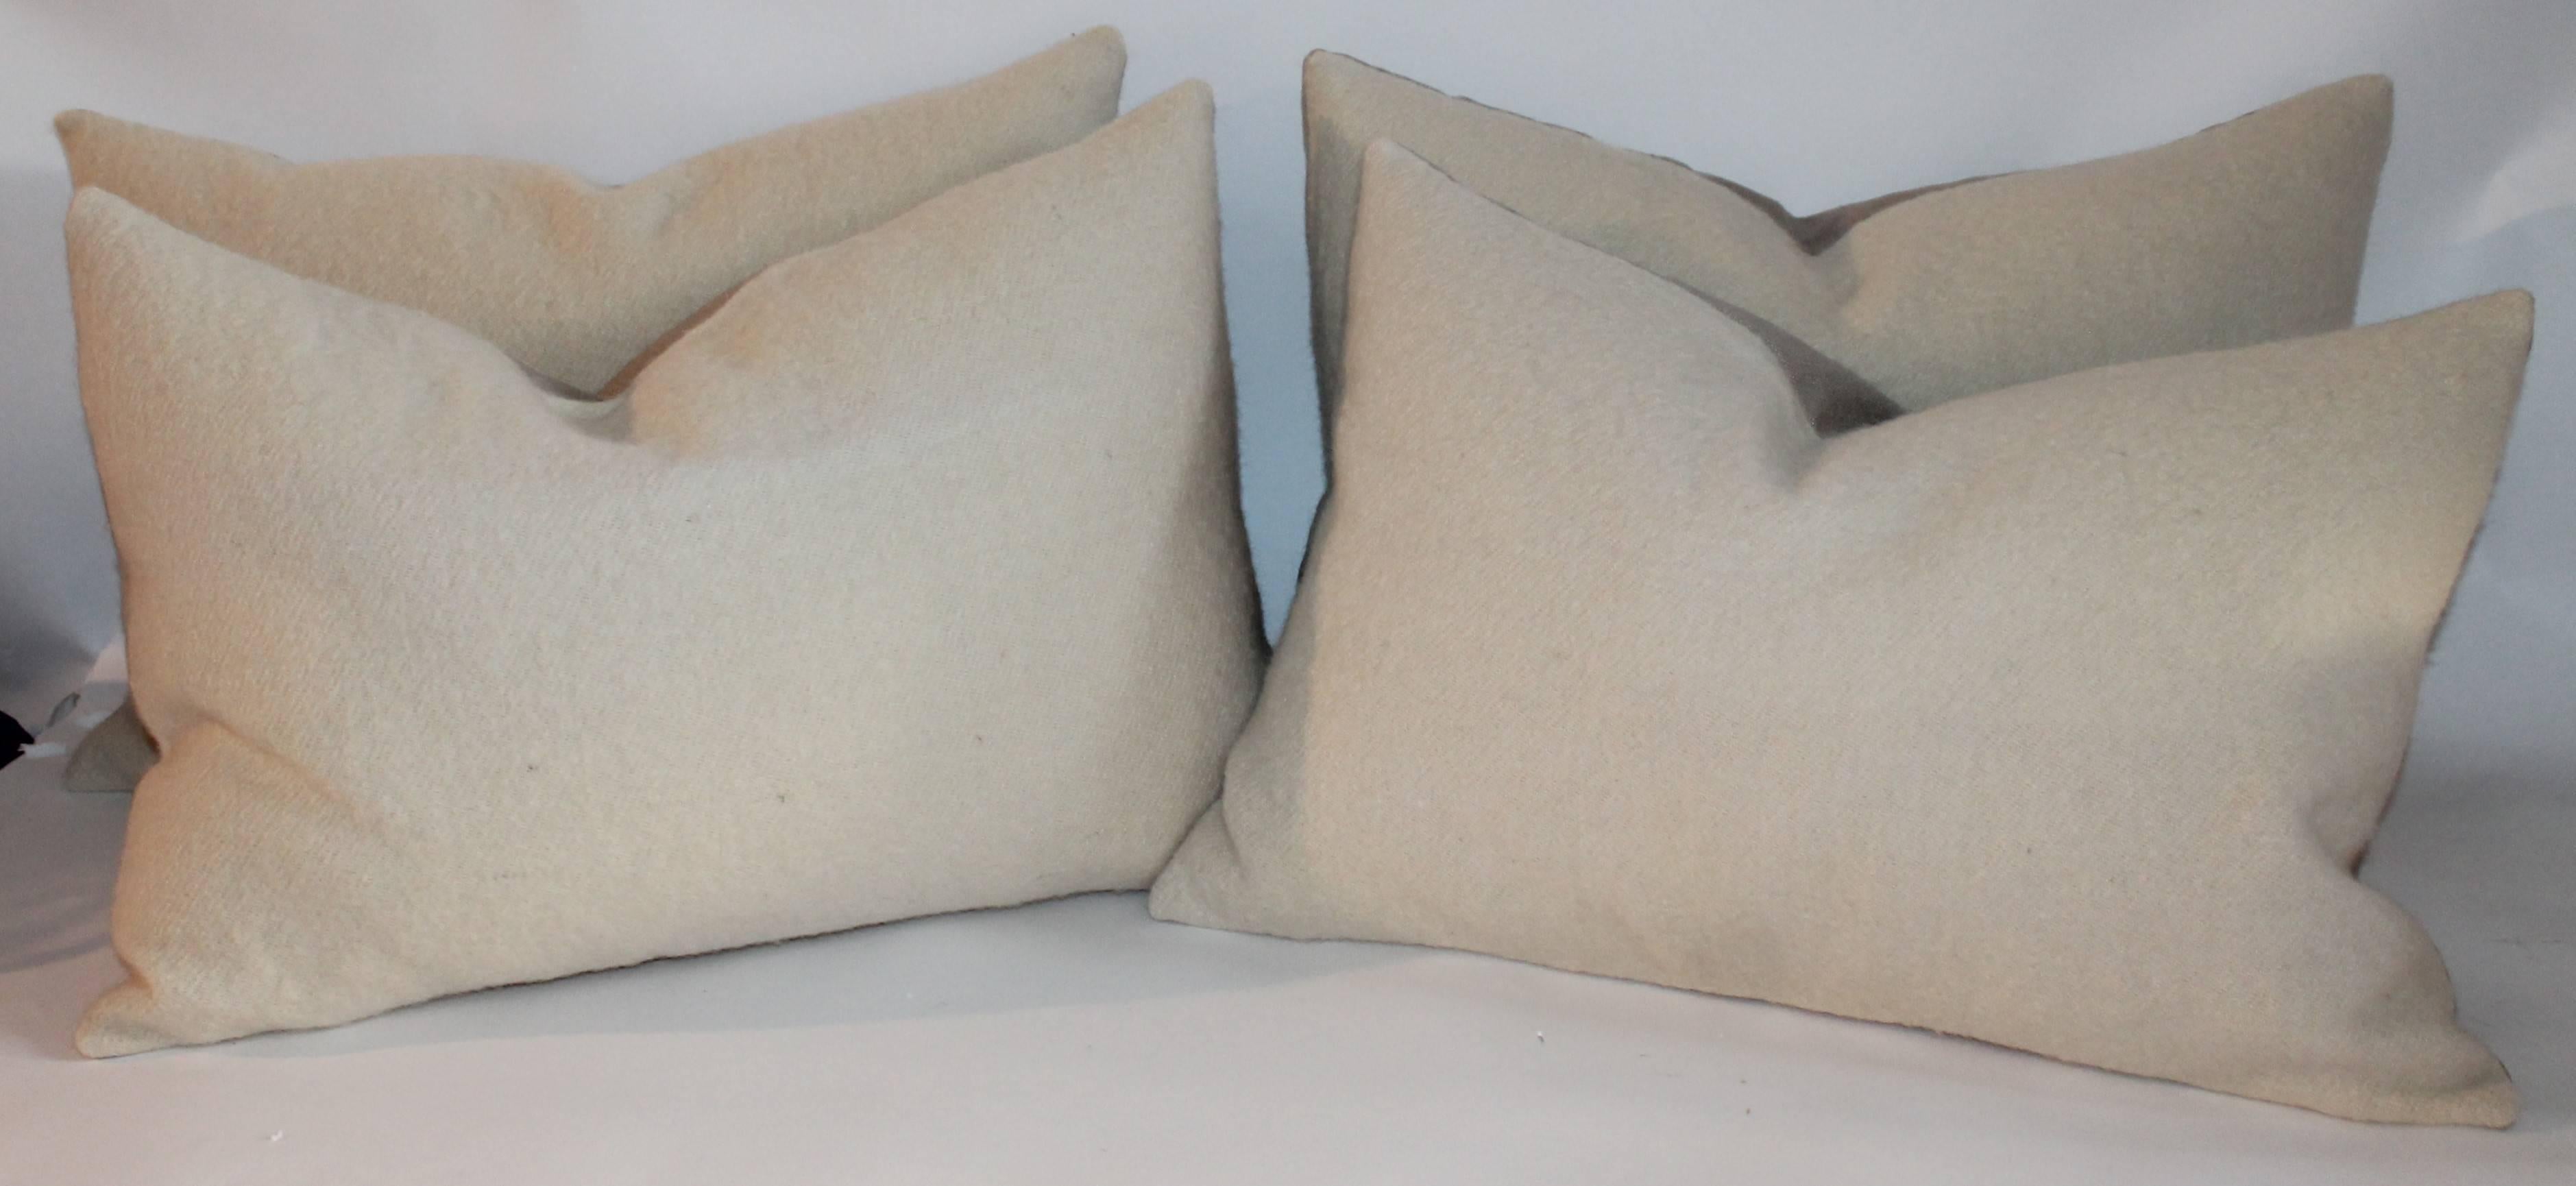 These mohair plain and simple soft pillows are in pristine condition. Sold in pairs and two pairs in stock.